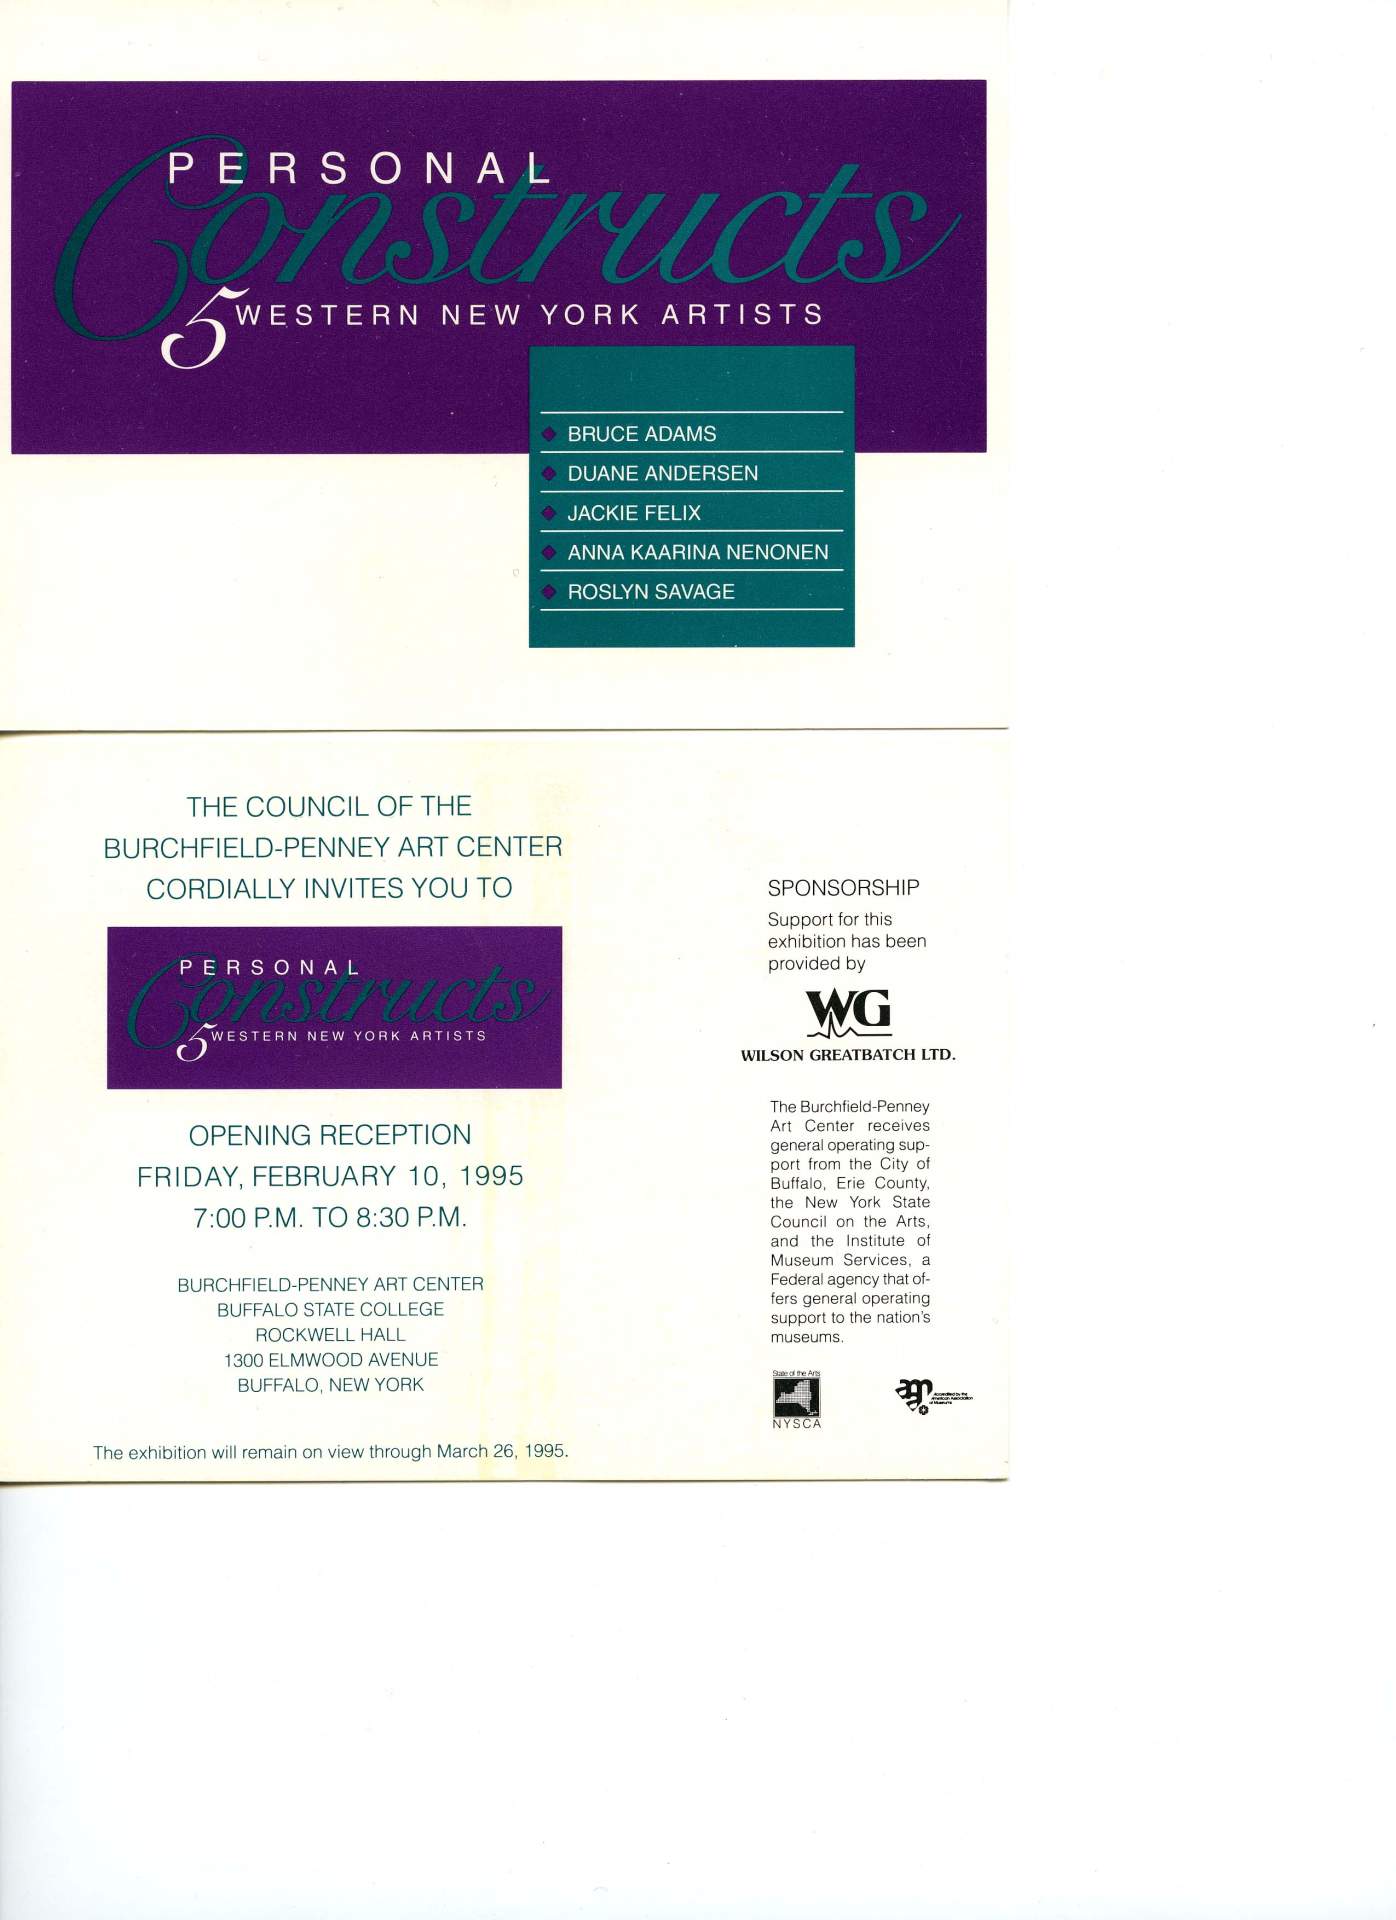 "Personal Constructs Opening Reception invitation" front and back